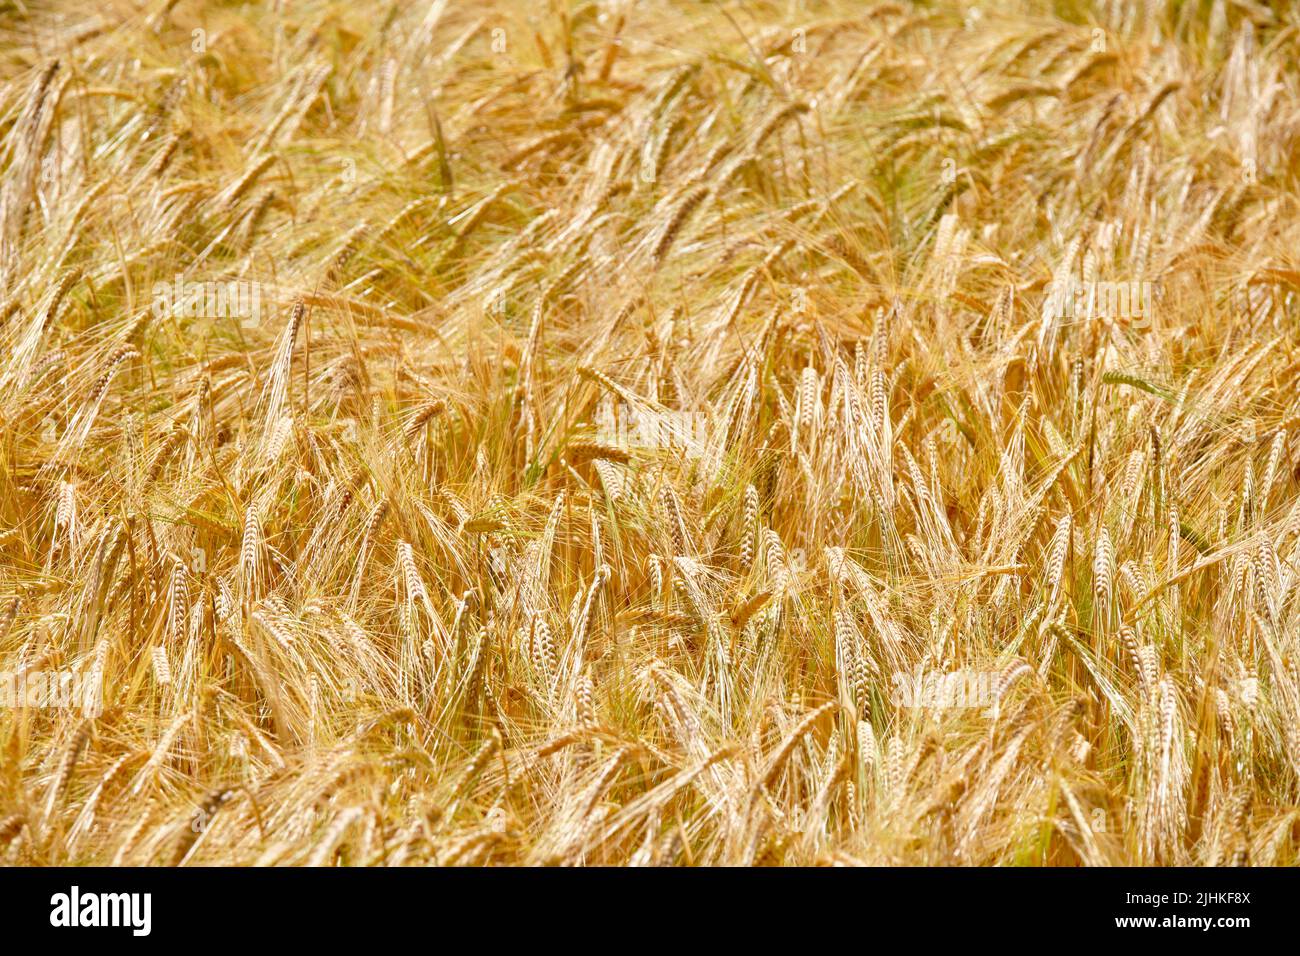 Close-up of a bright agricultural field with barley in the sun. Seen in Germany in July. Stock Photo